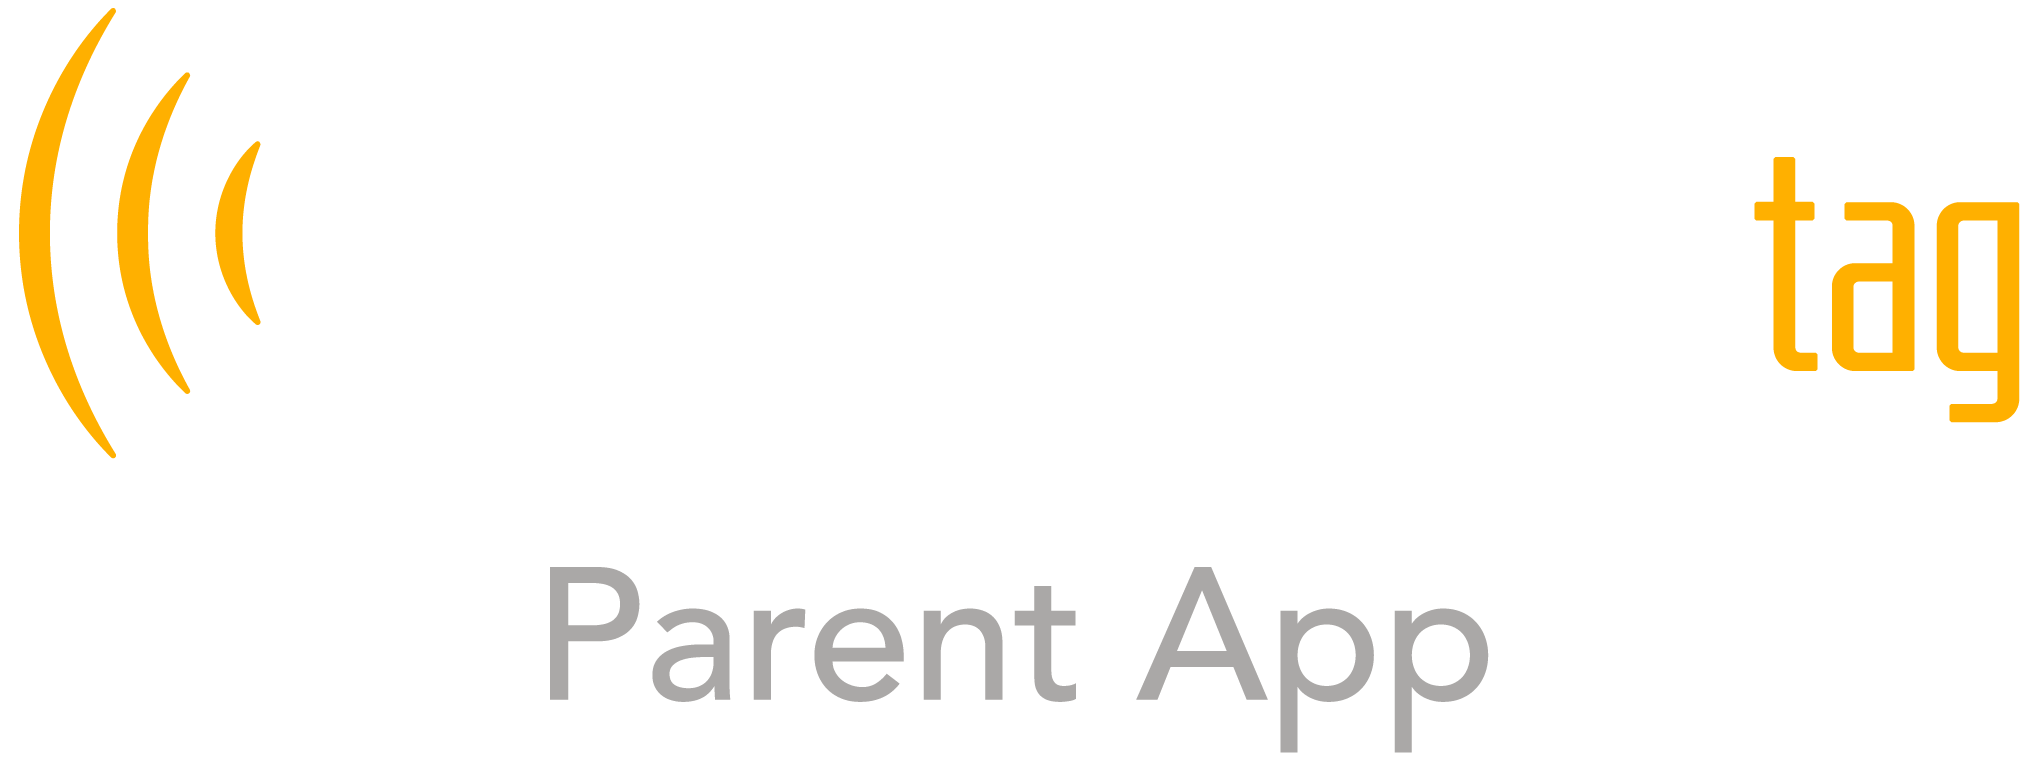 SMART tag™ Parent App on the App Store